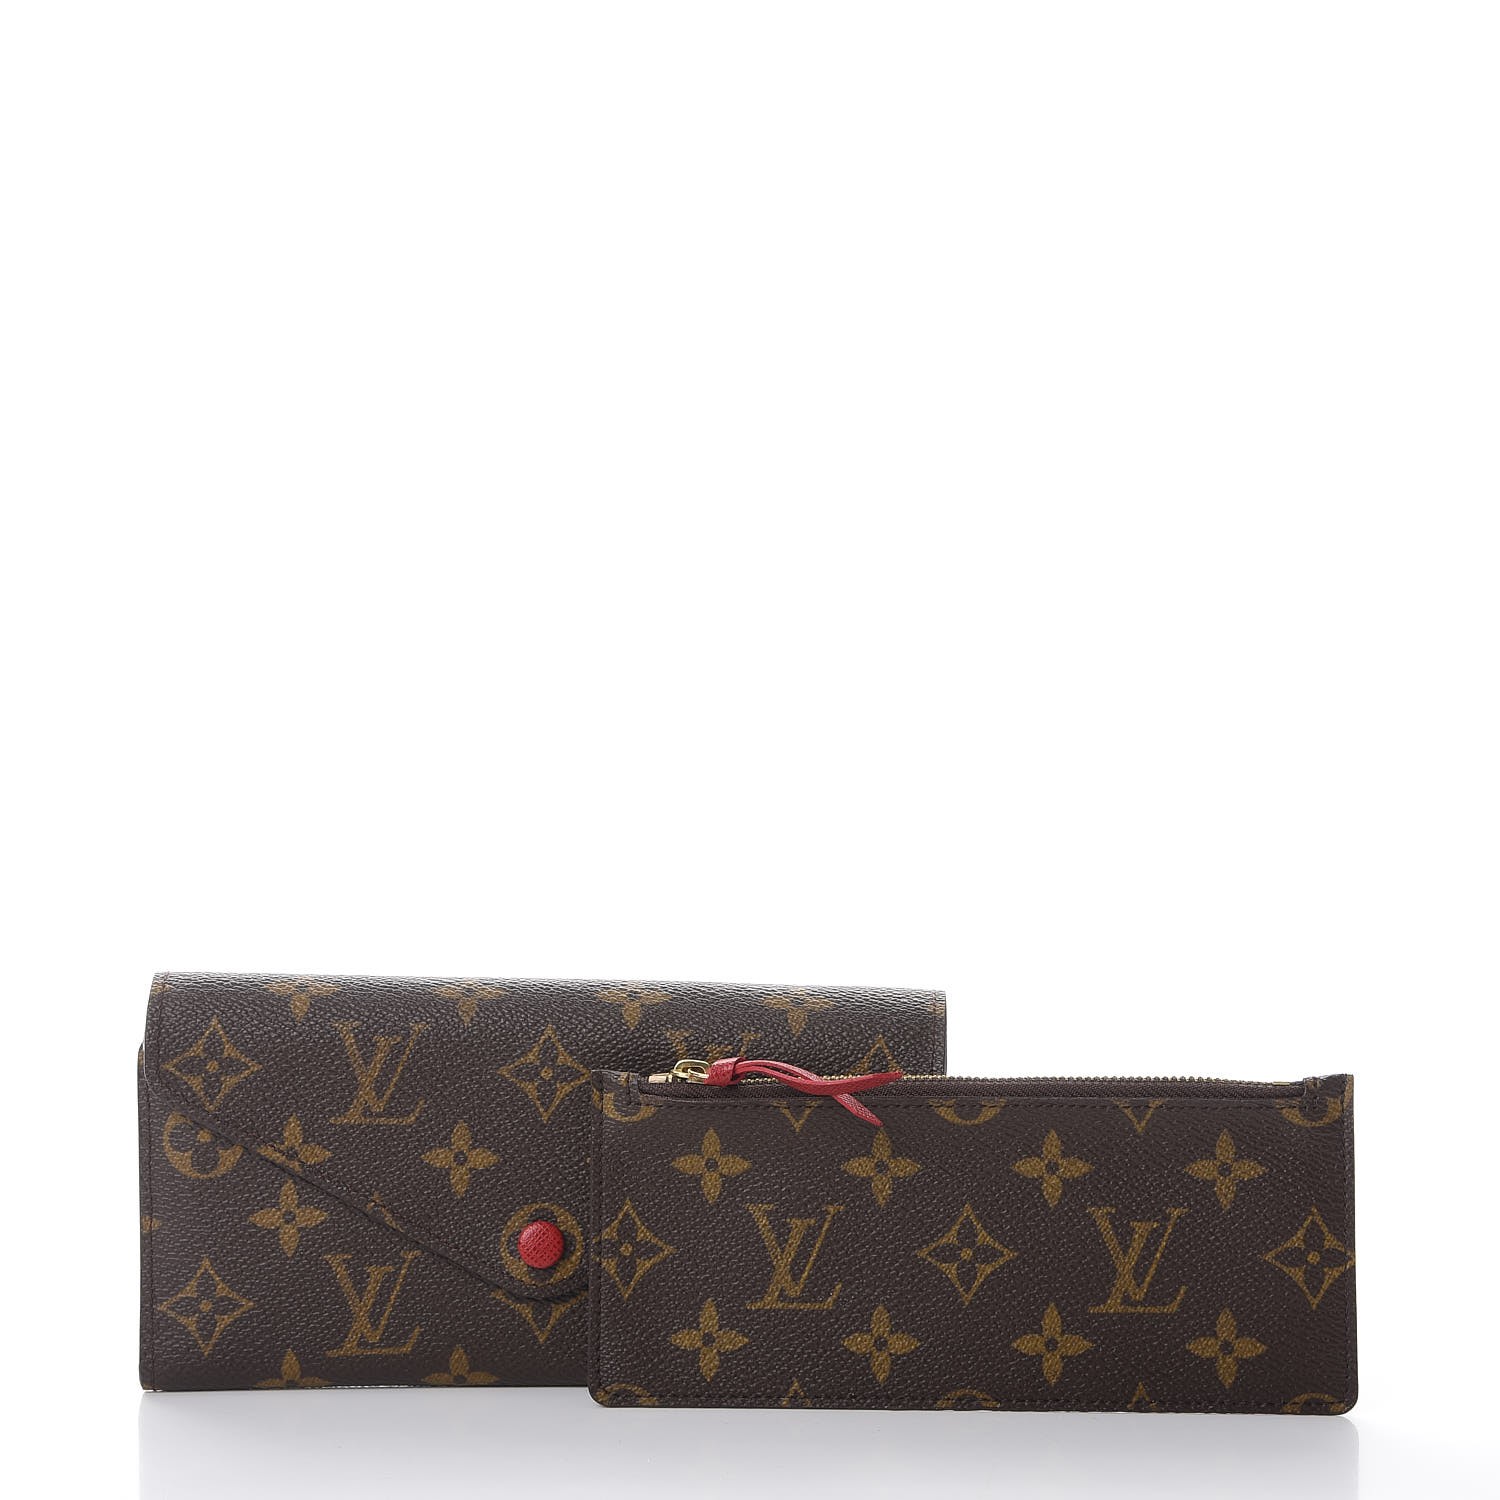 Lv Boetie Wallet Search  Natural Resource Department